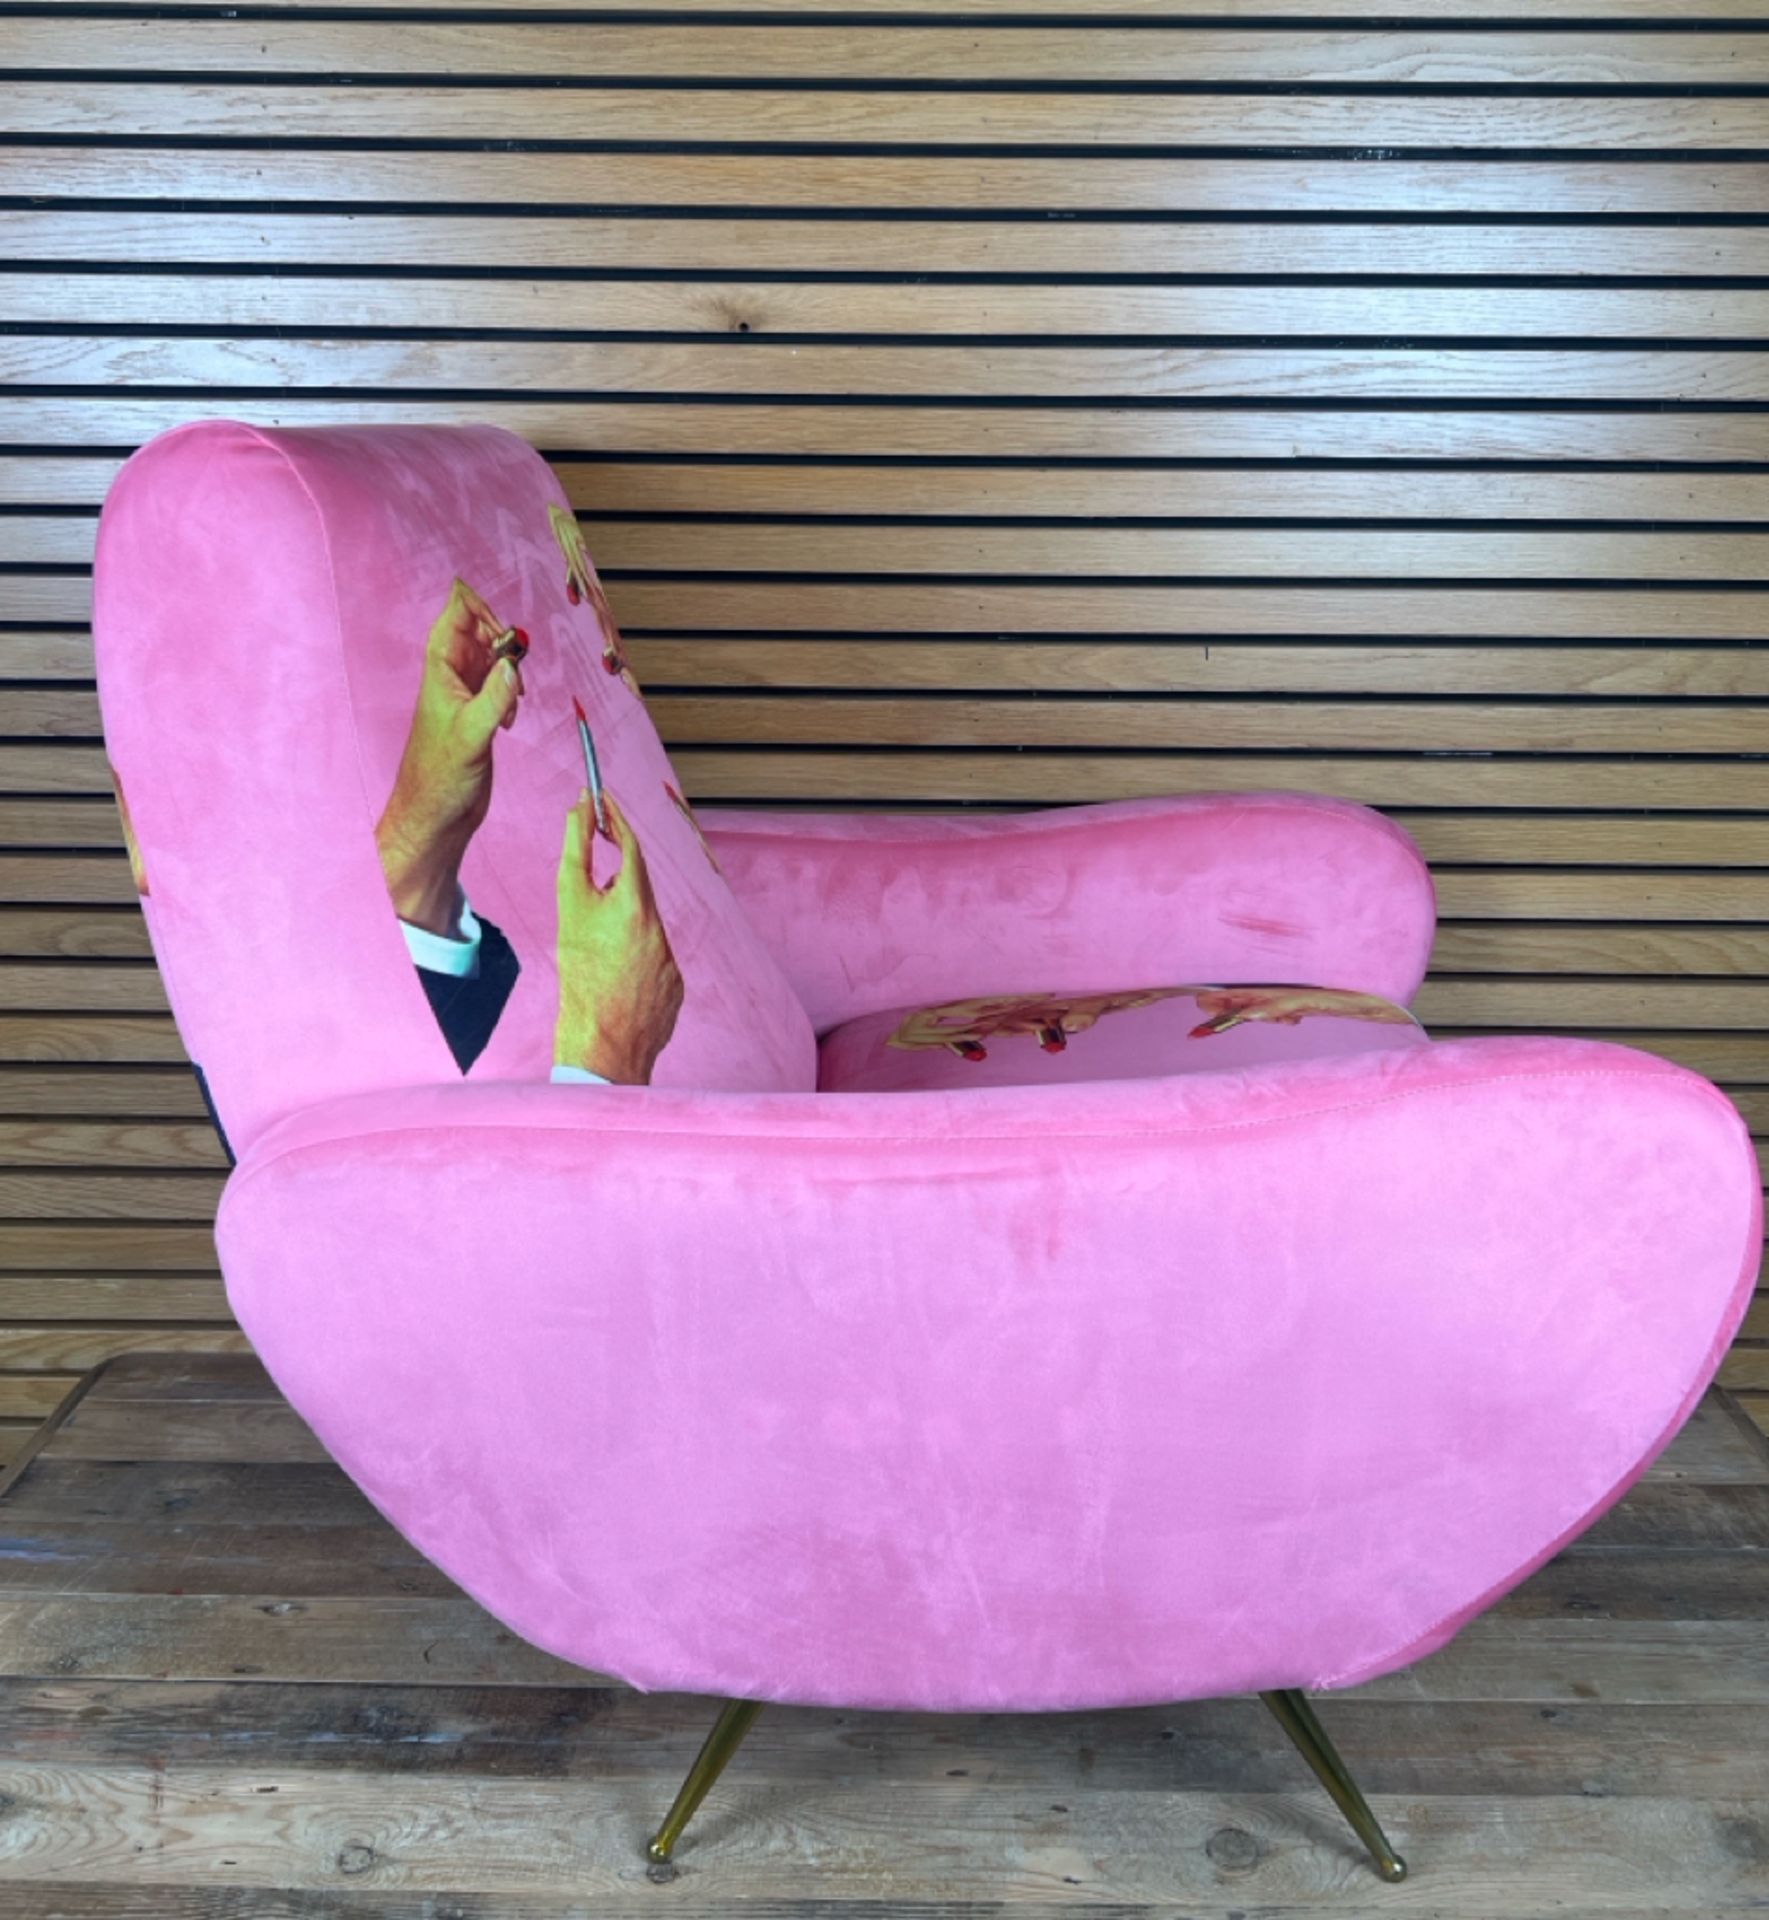 Seletti Wears Toilet Paper Upholstered Wooden Armchair in Pink With Lipstick Design - Image 3 of 4